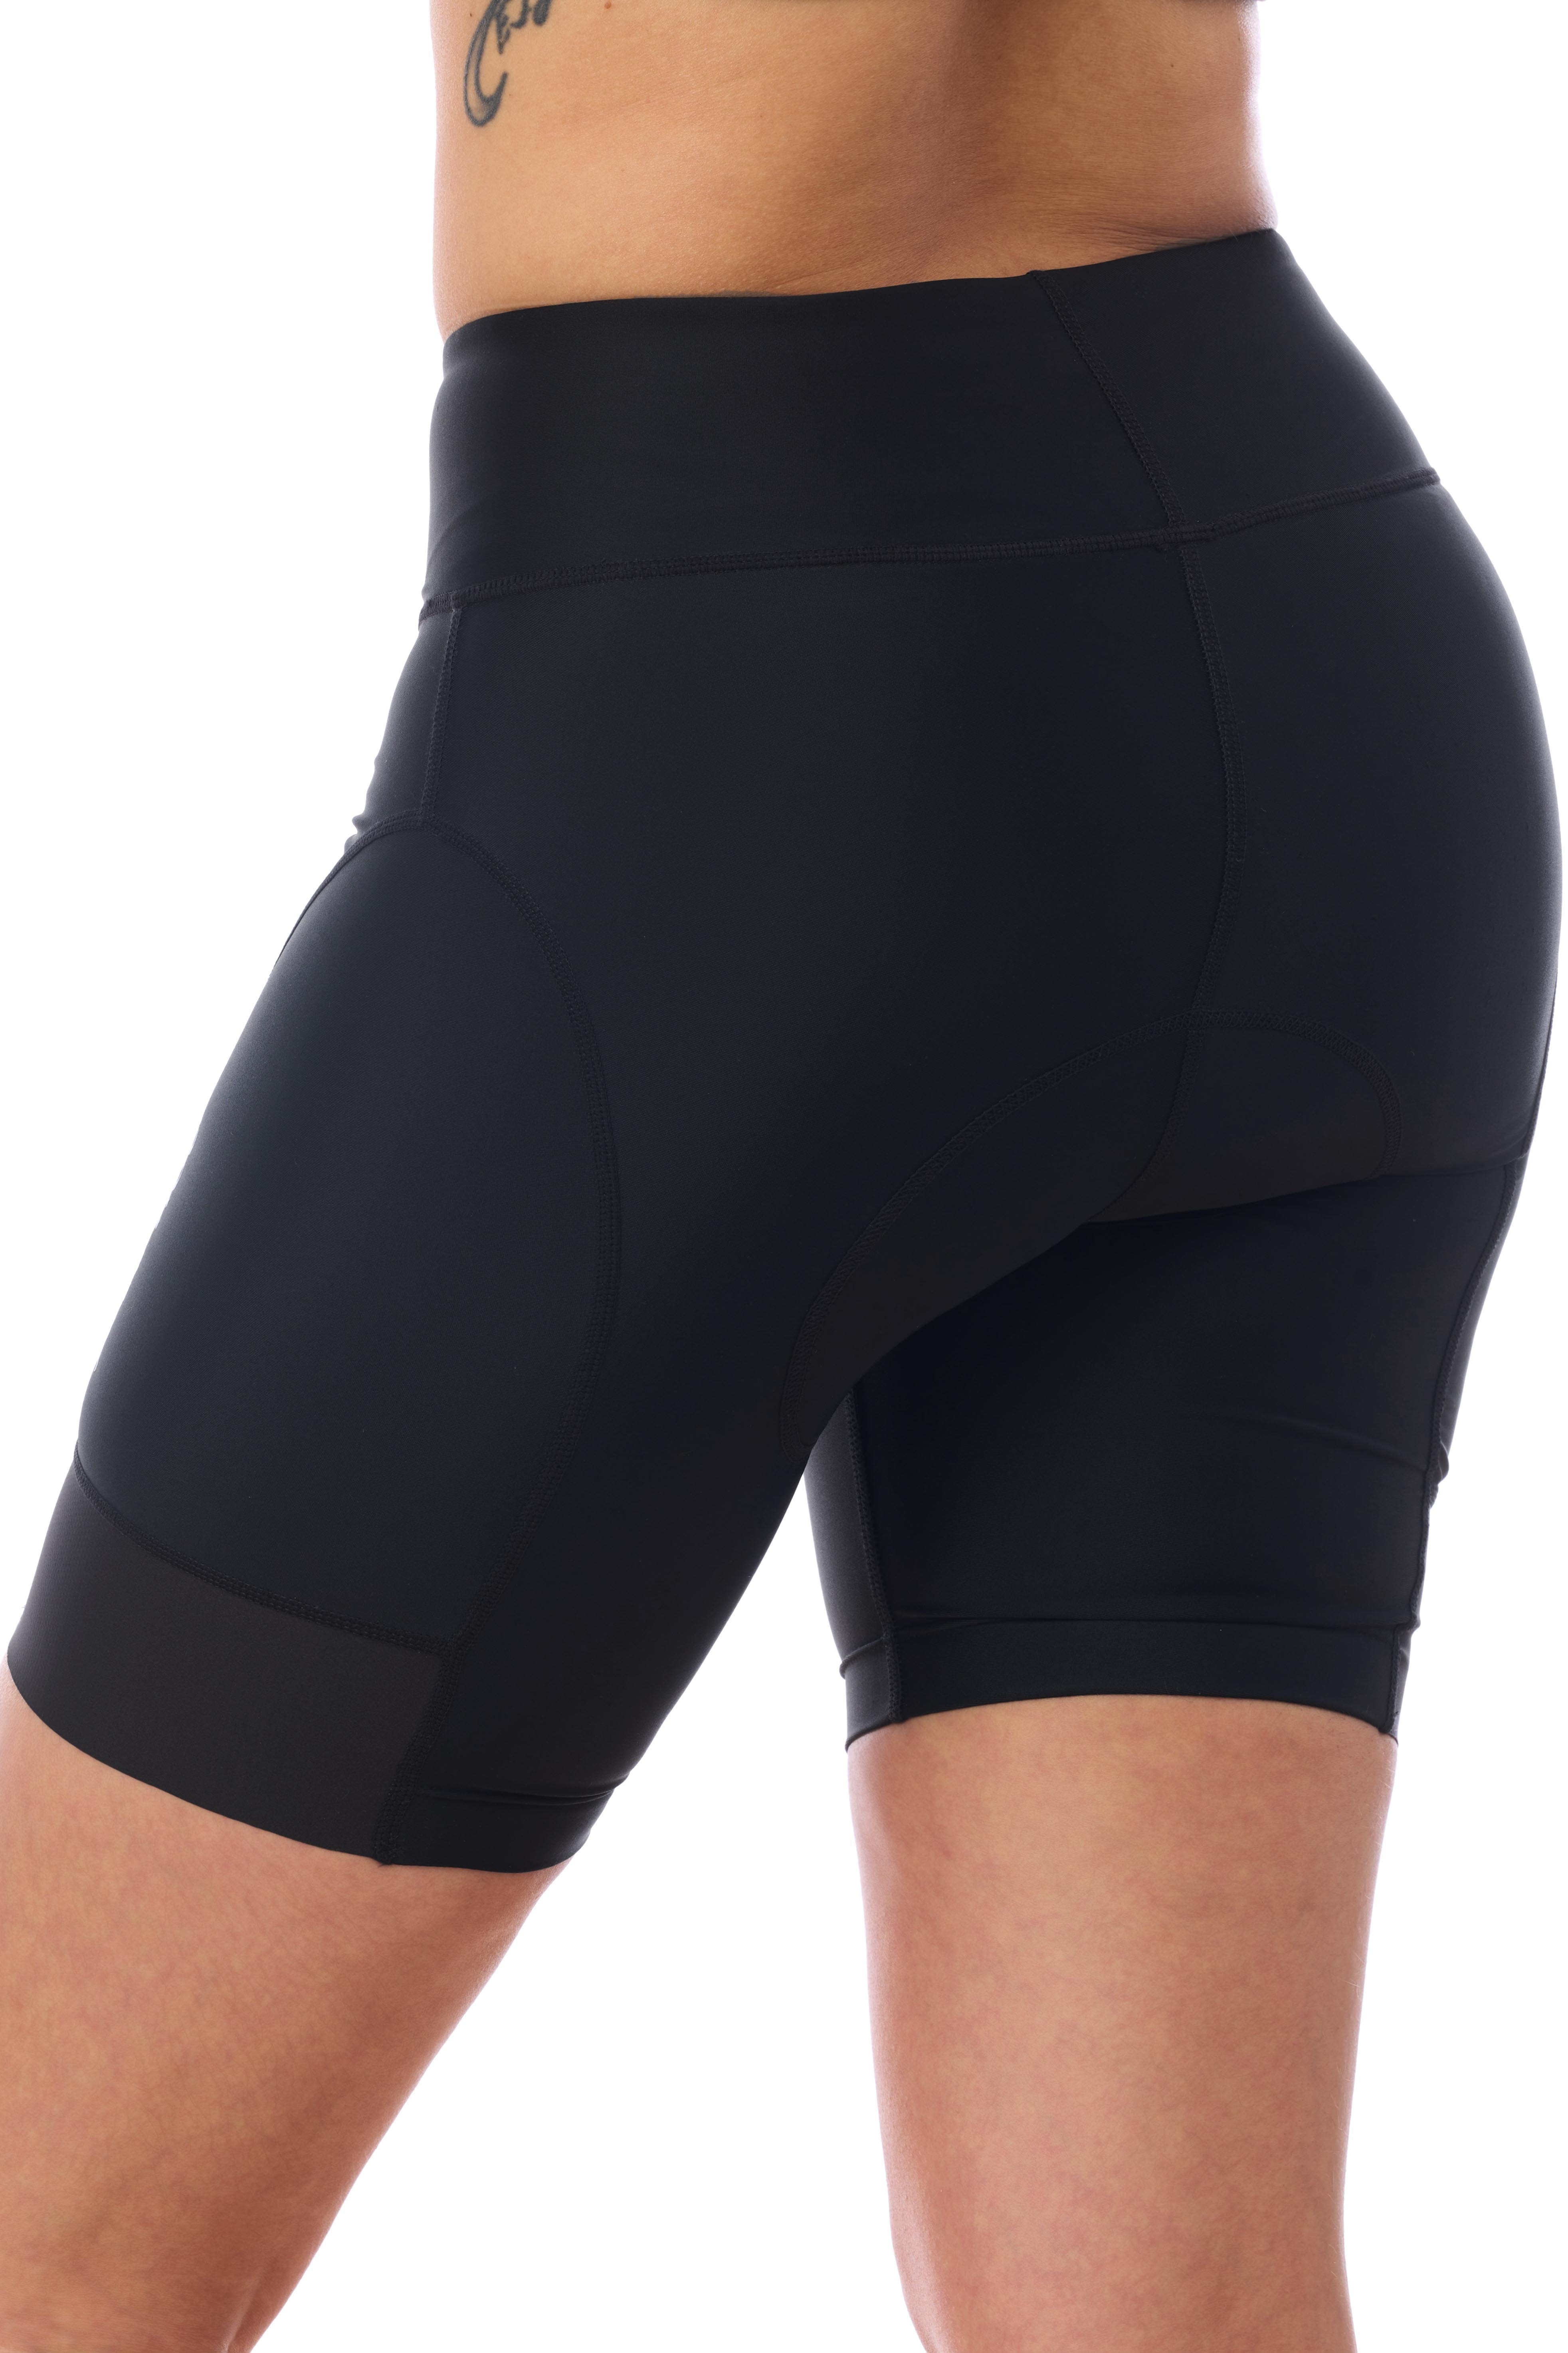 JolieRide Cycling shorts women's cycling shorts with anti-shock pad and wide waistband